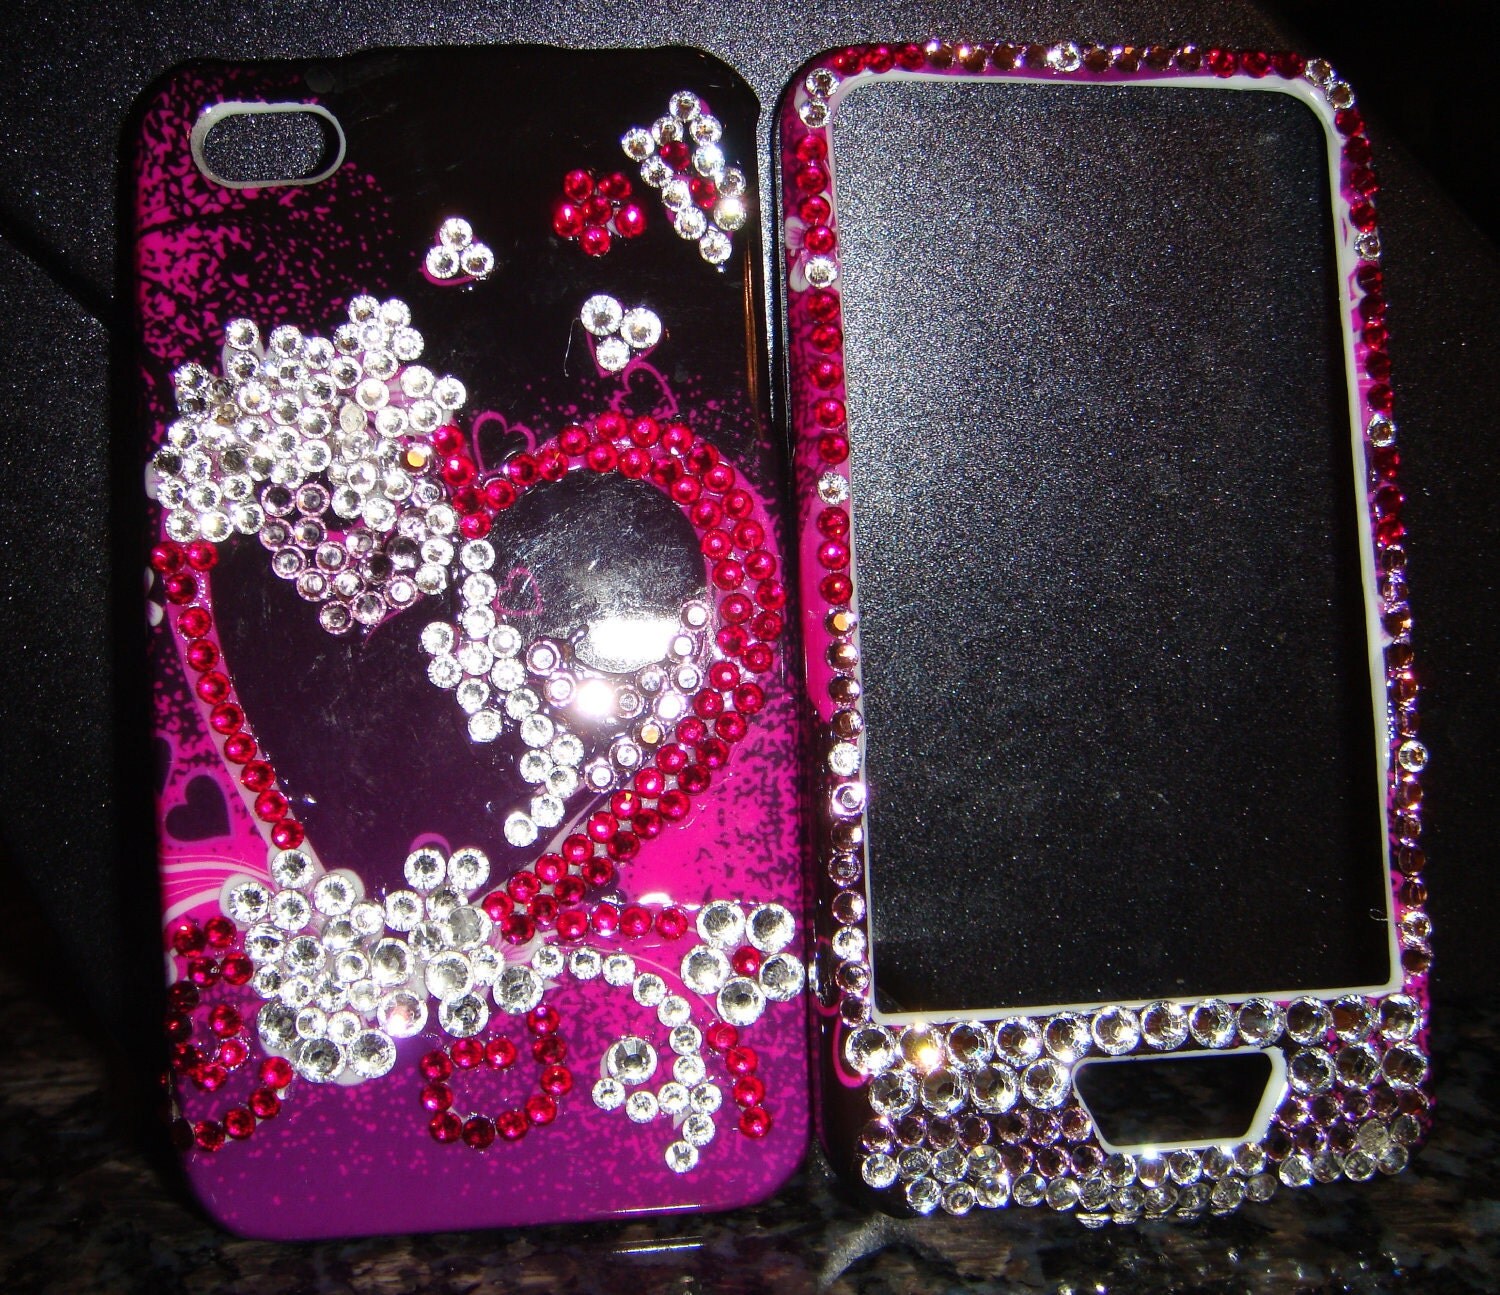 iPhone Swarovski Cell Phone Case for 4 or 4S Phones